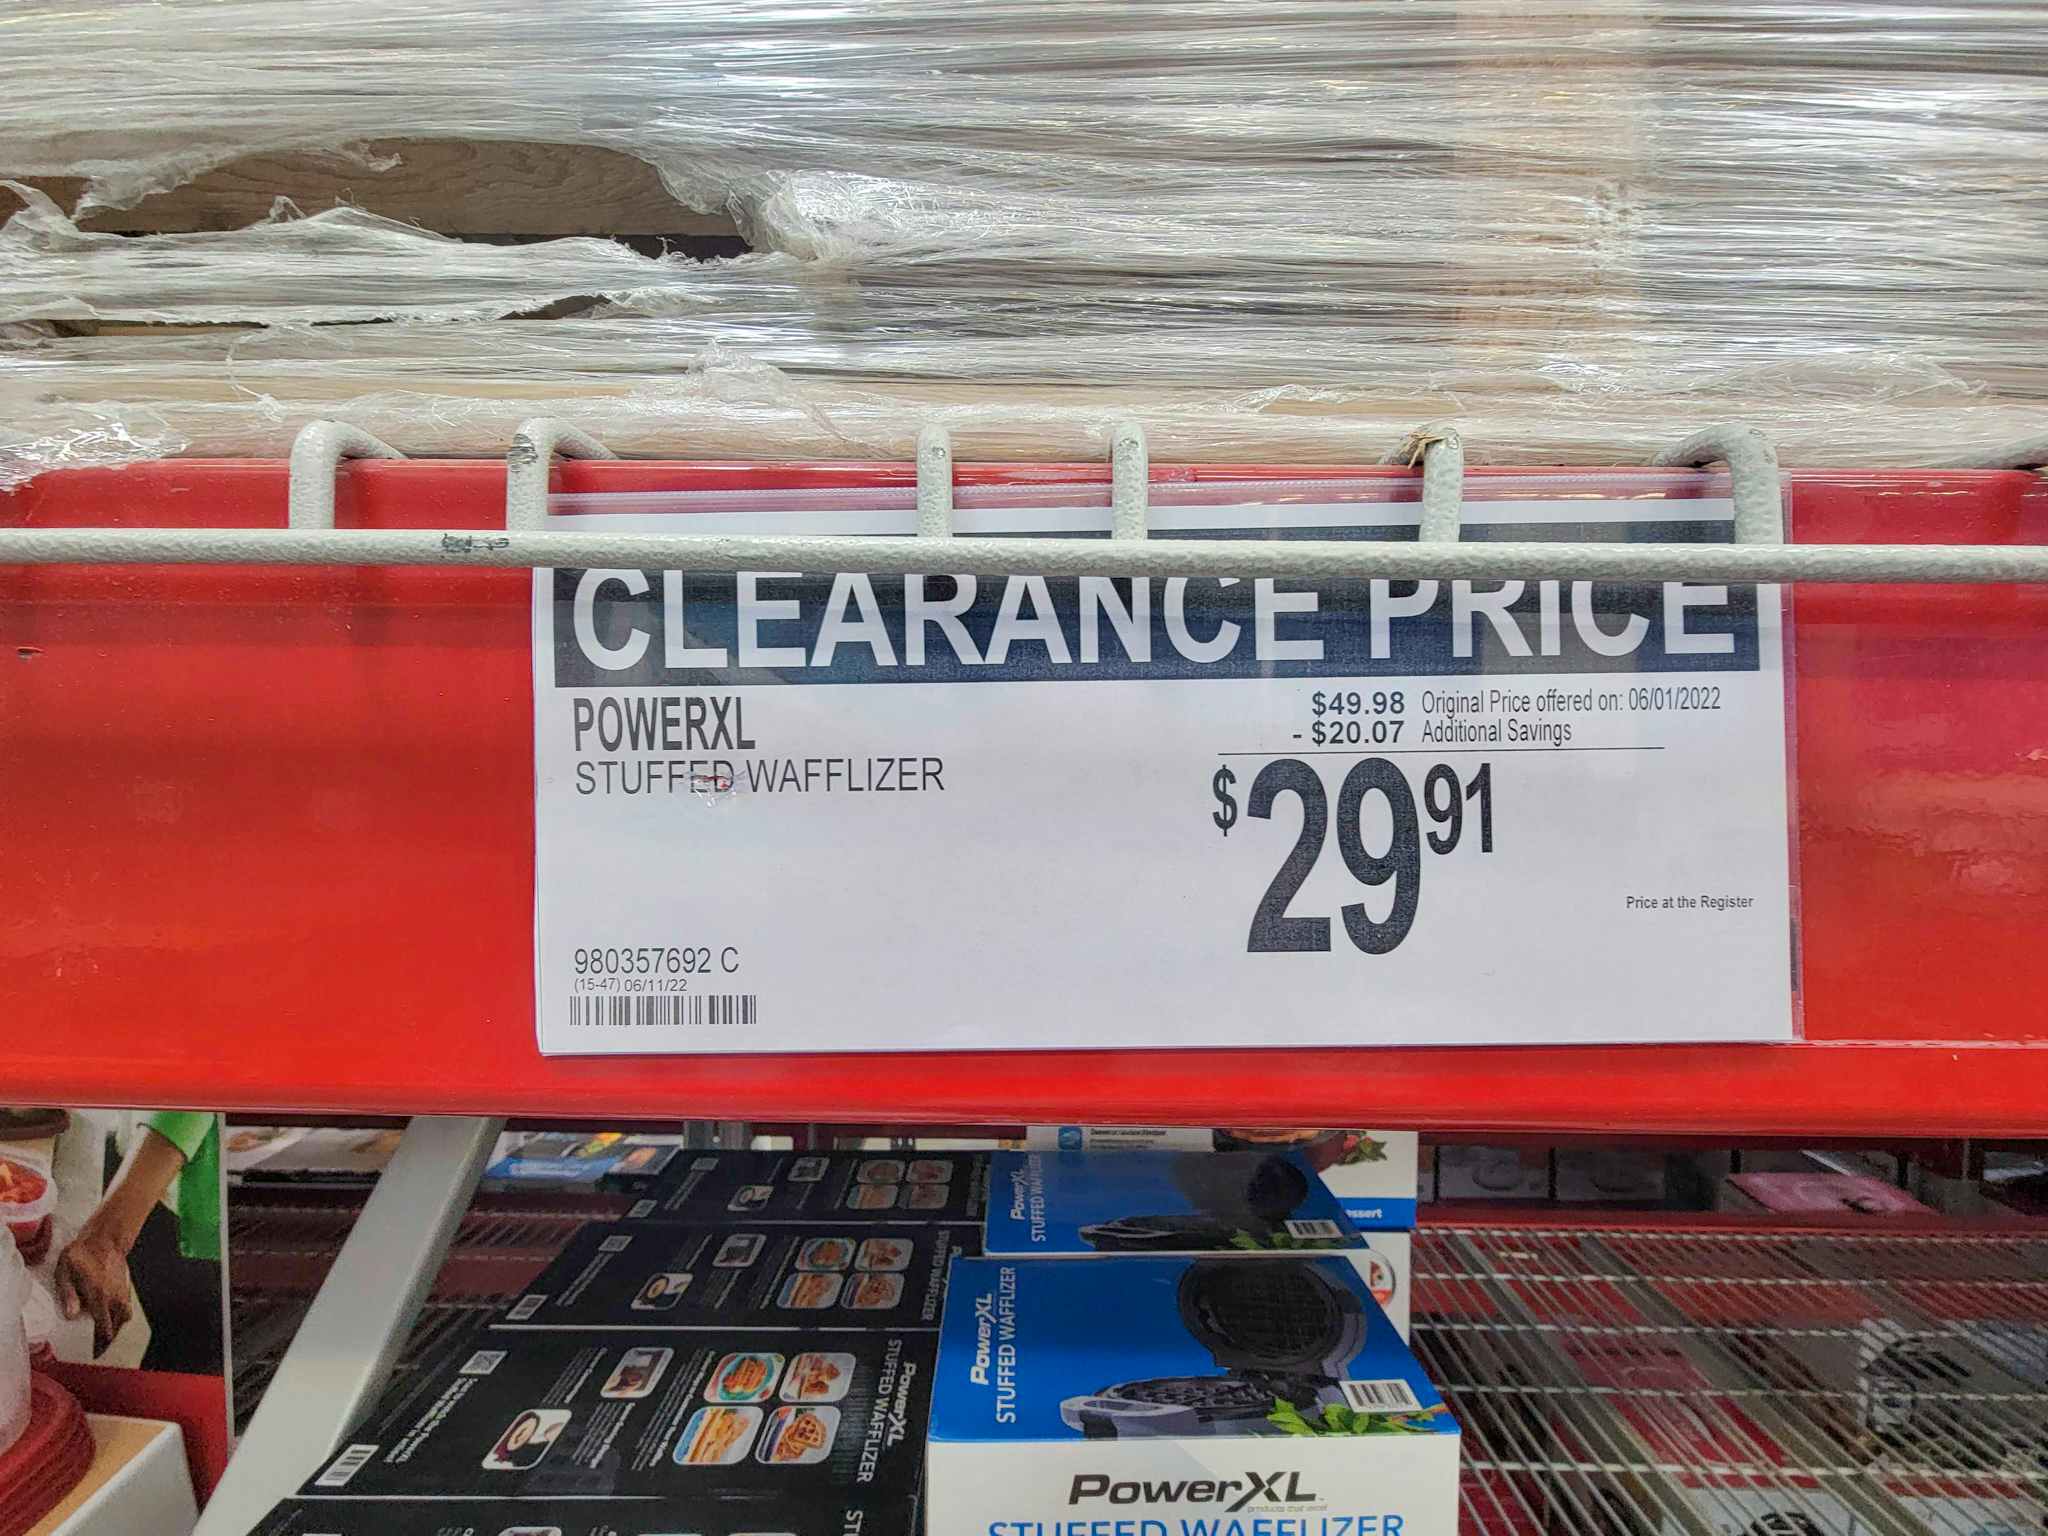 clearance sign for powerxl stuffed wafflizer